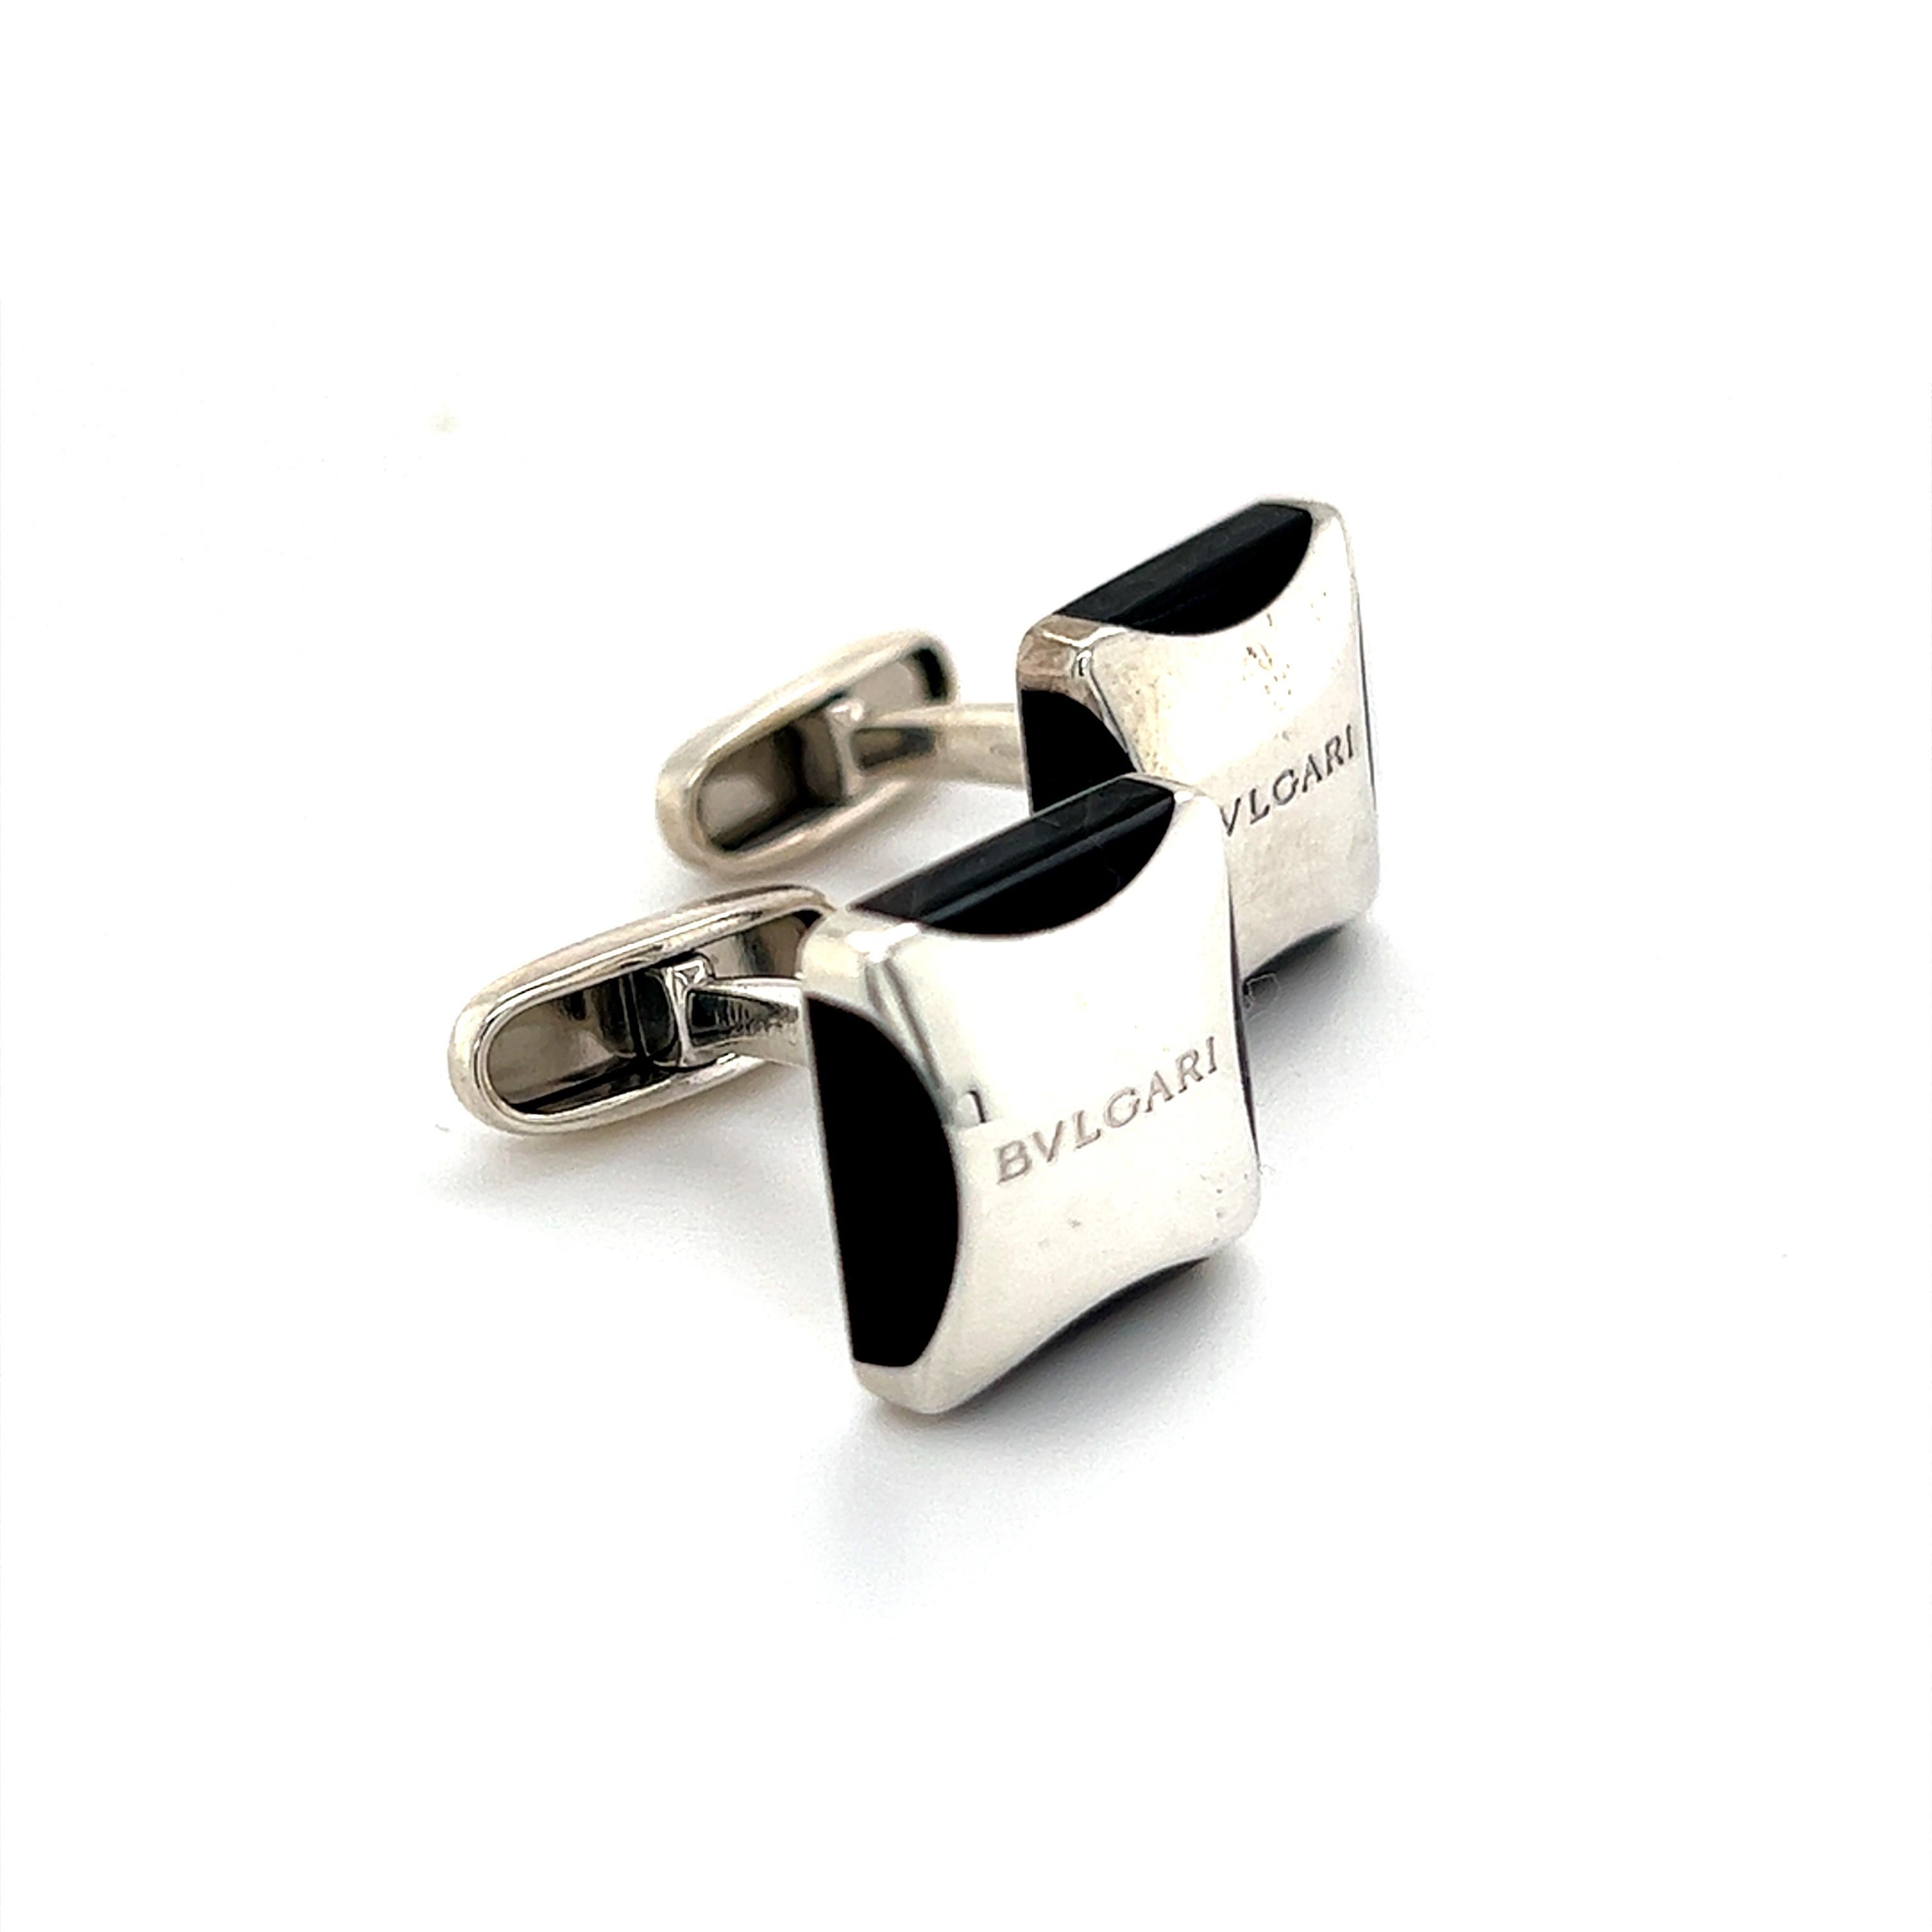 Bulgari Estate Onyx Cufflinks Sterling Silver 19.24 Grams B1

TRUSTED SELLER SINCE 2002

PLEASE SEE OUR HUNDREDS OF POSITIVE FEEDBACKS FROM OUR CLIENTS!!

FREE SHIPPING

DETAILS
Material: Onyx and Sterling Silver
Weight: 19.24 Grams

These Authentic